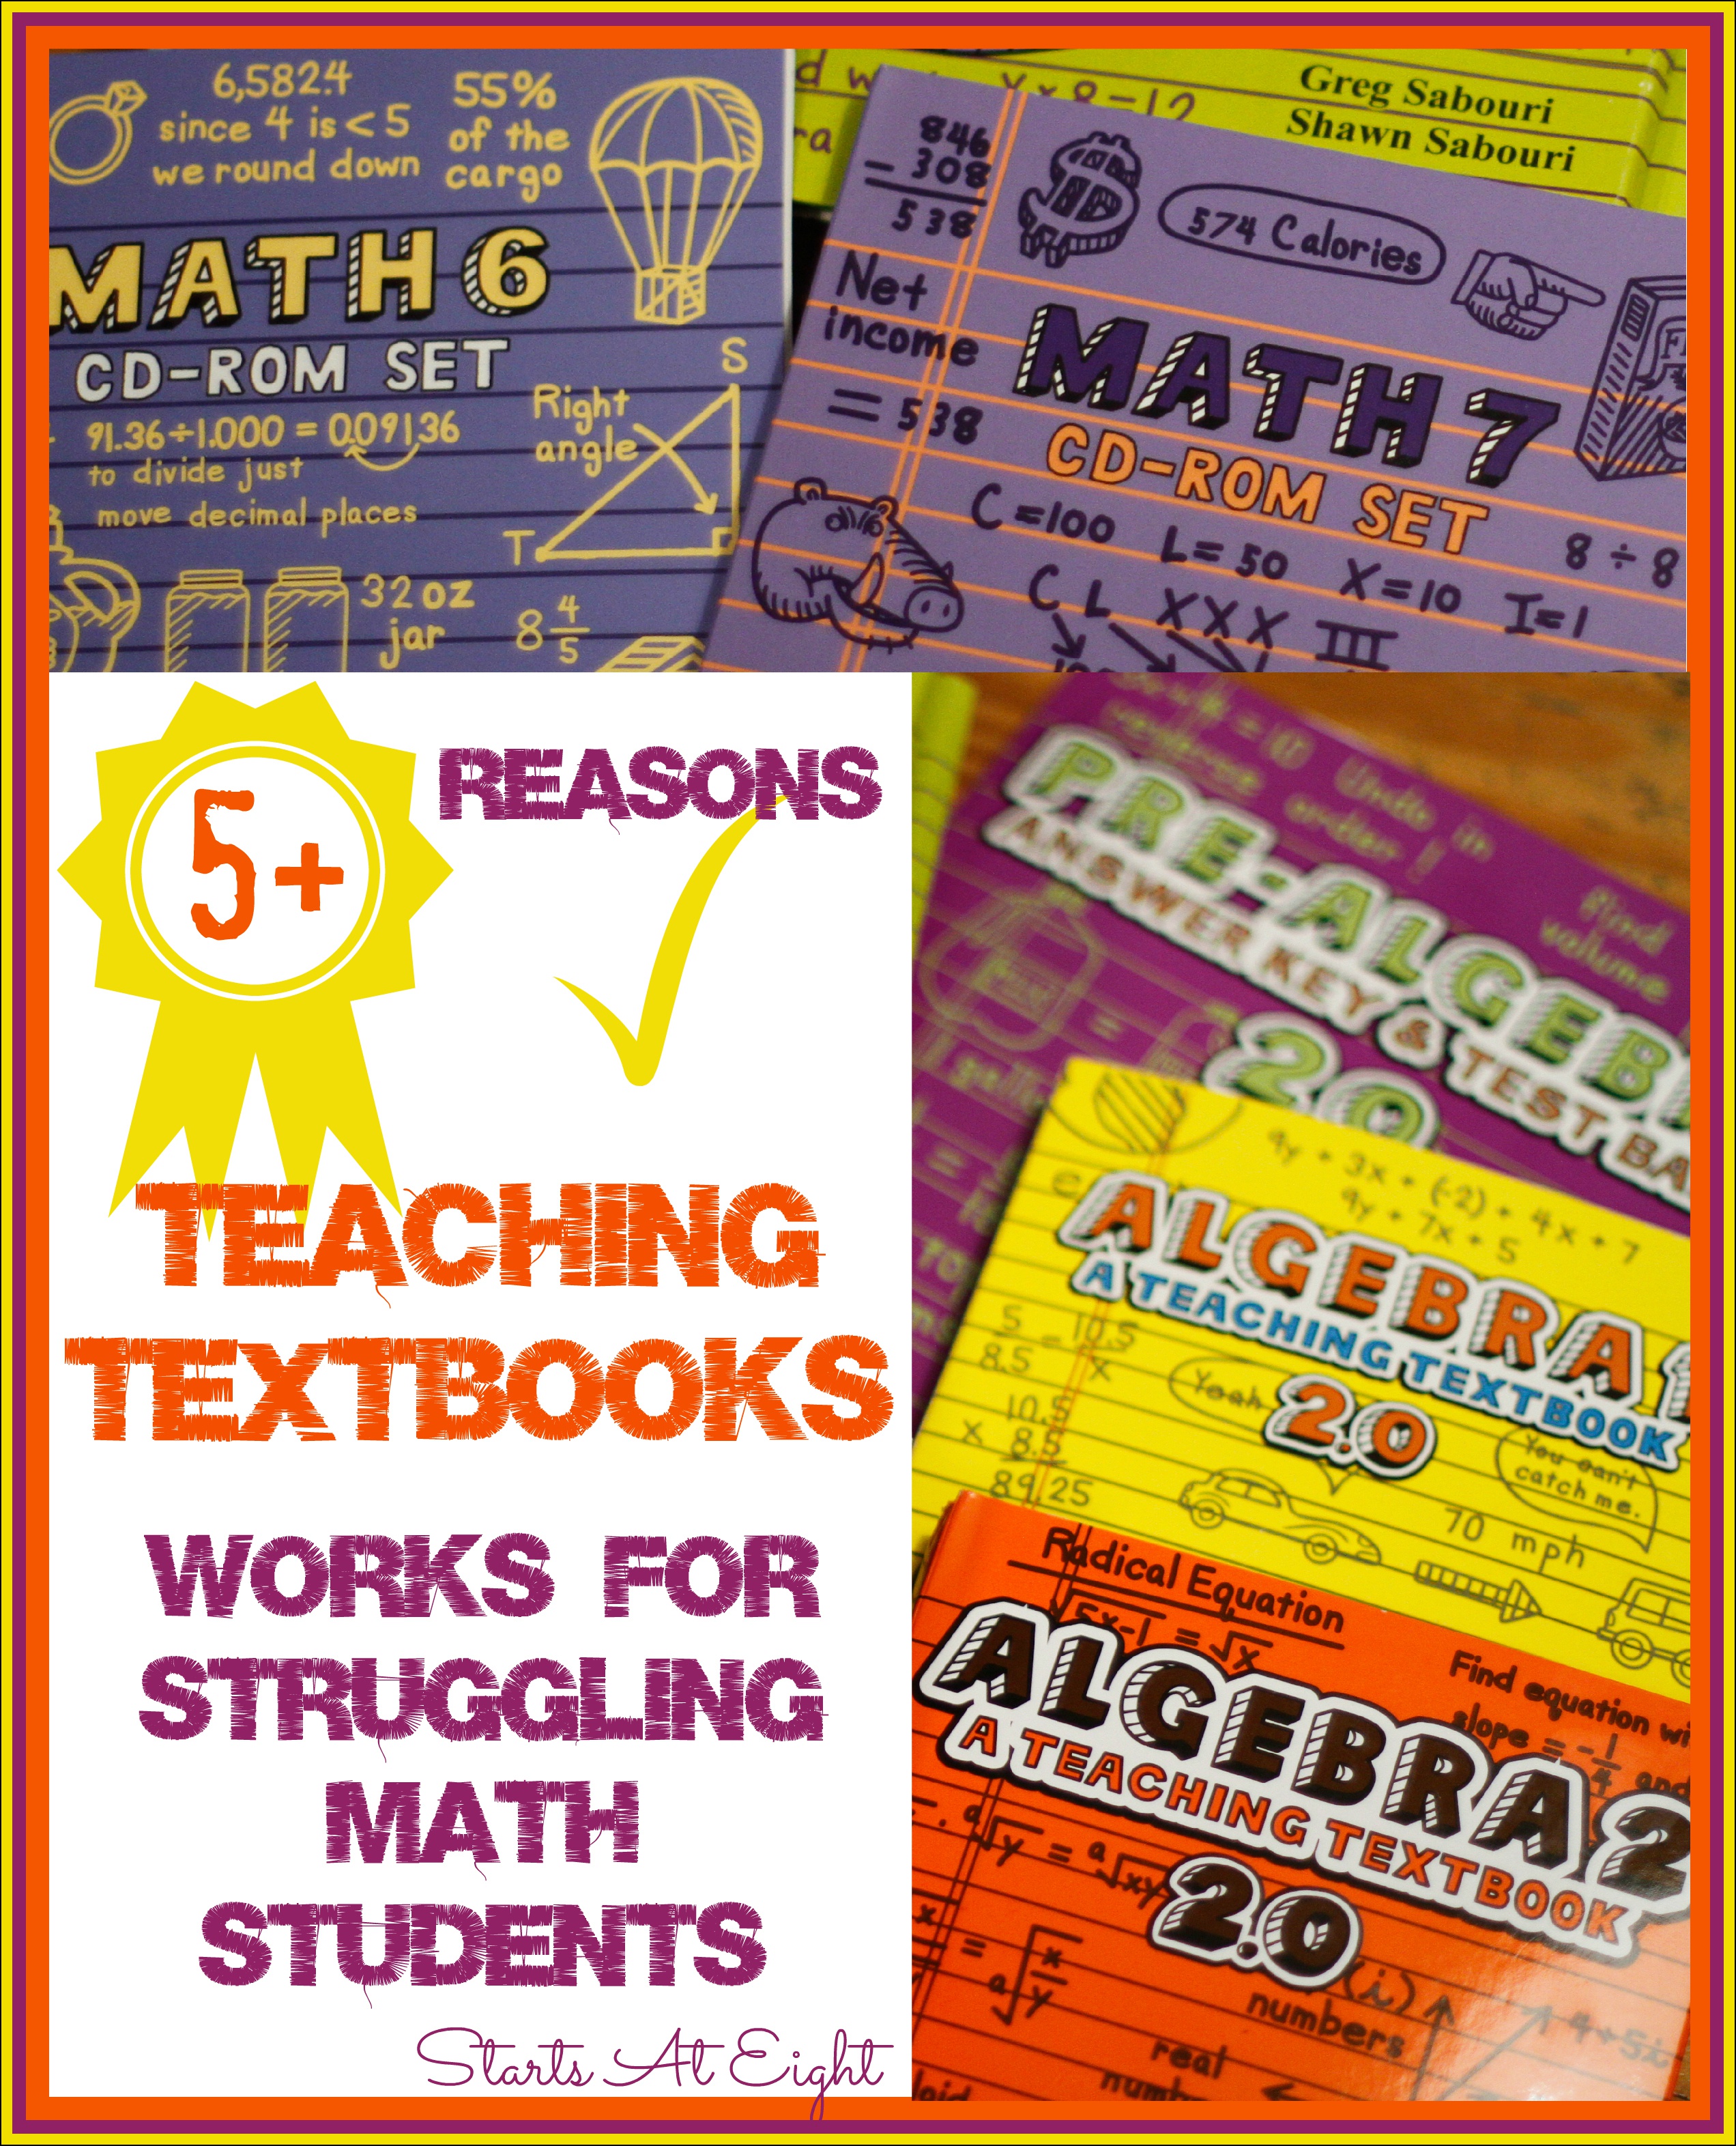 5+ Reasons Teaching Textbooks Works for Struggling Math Students